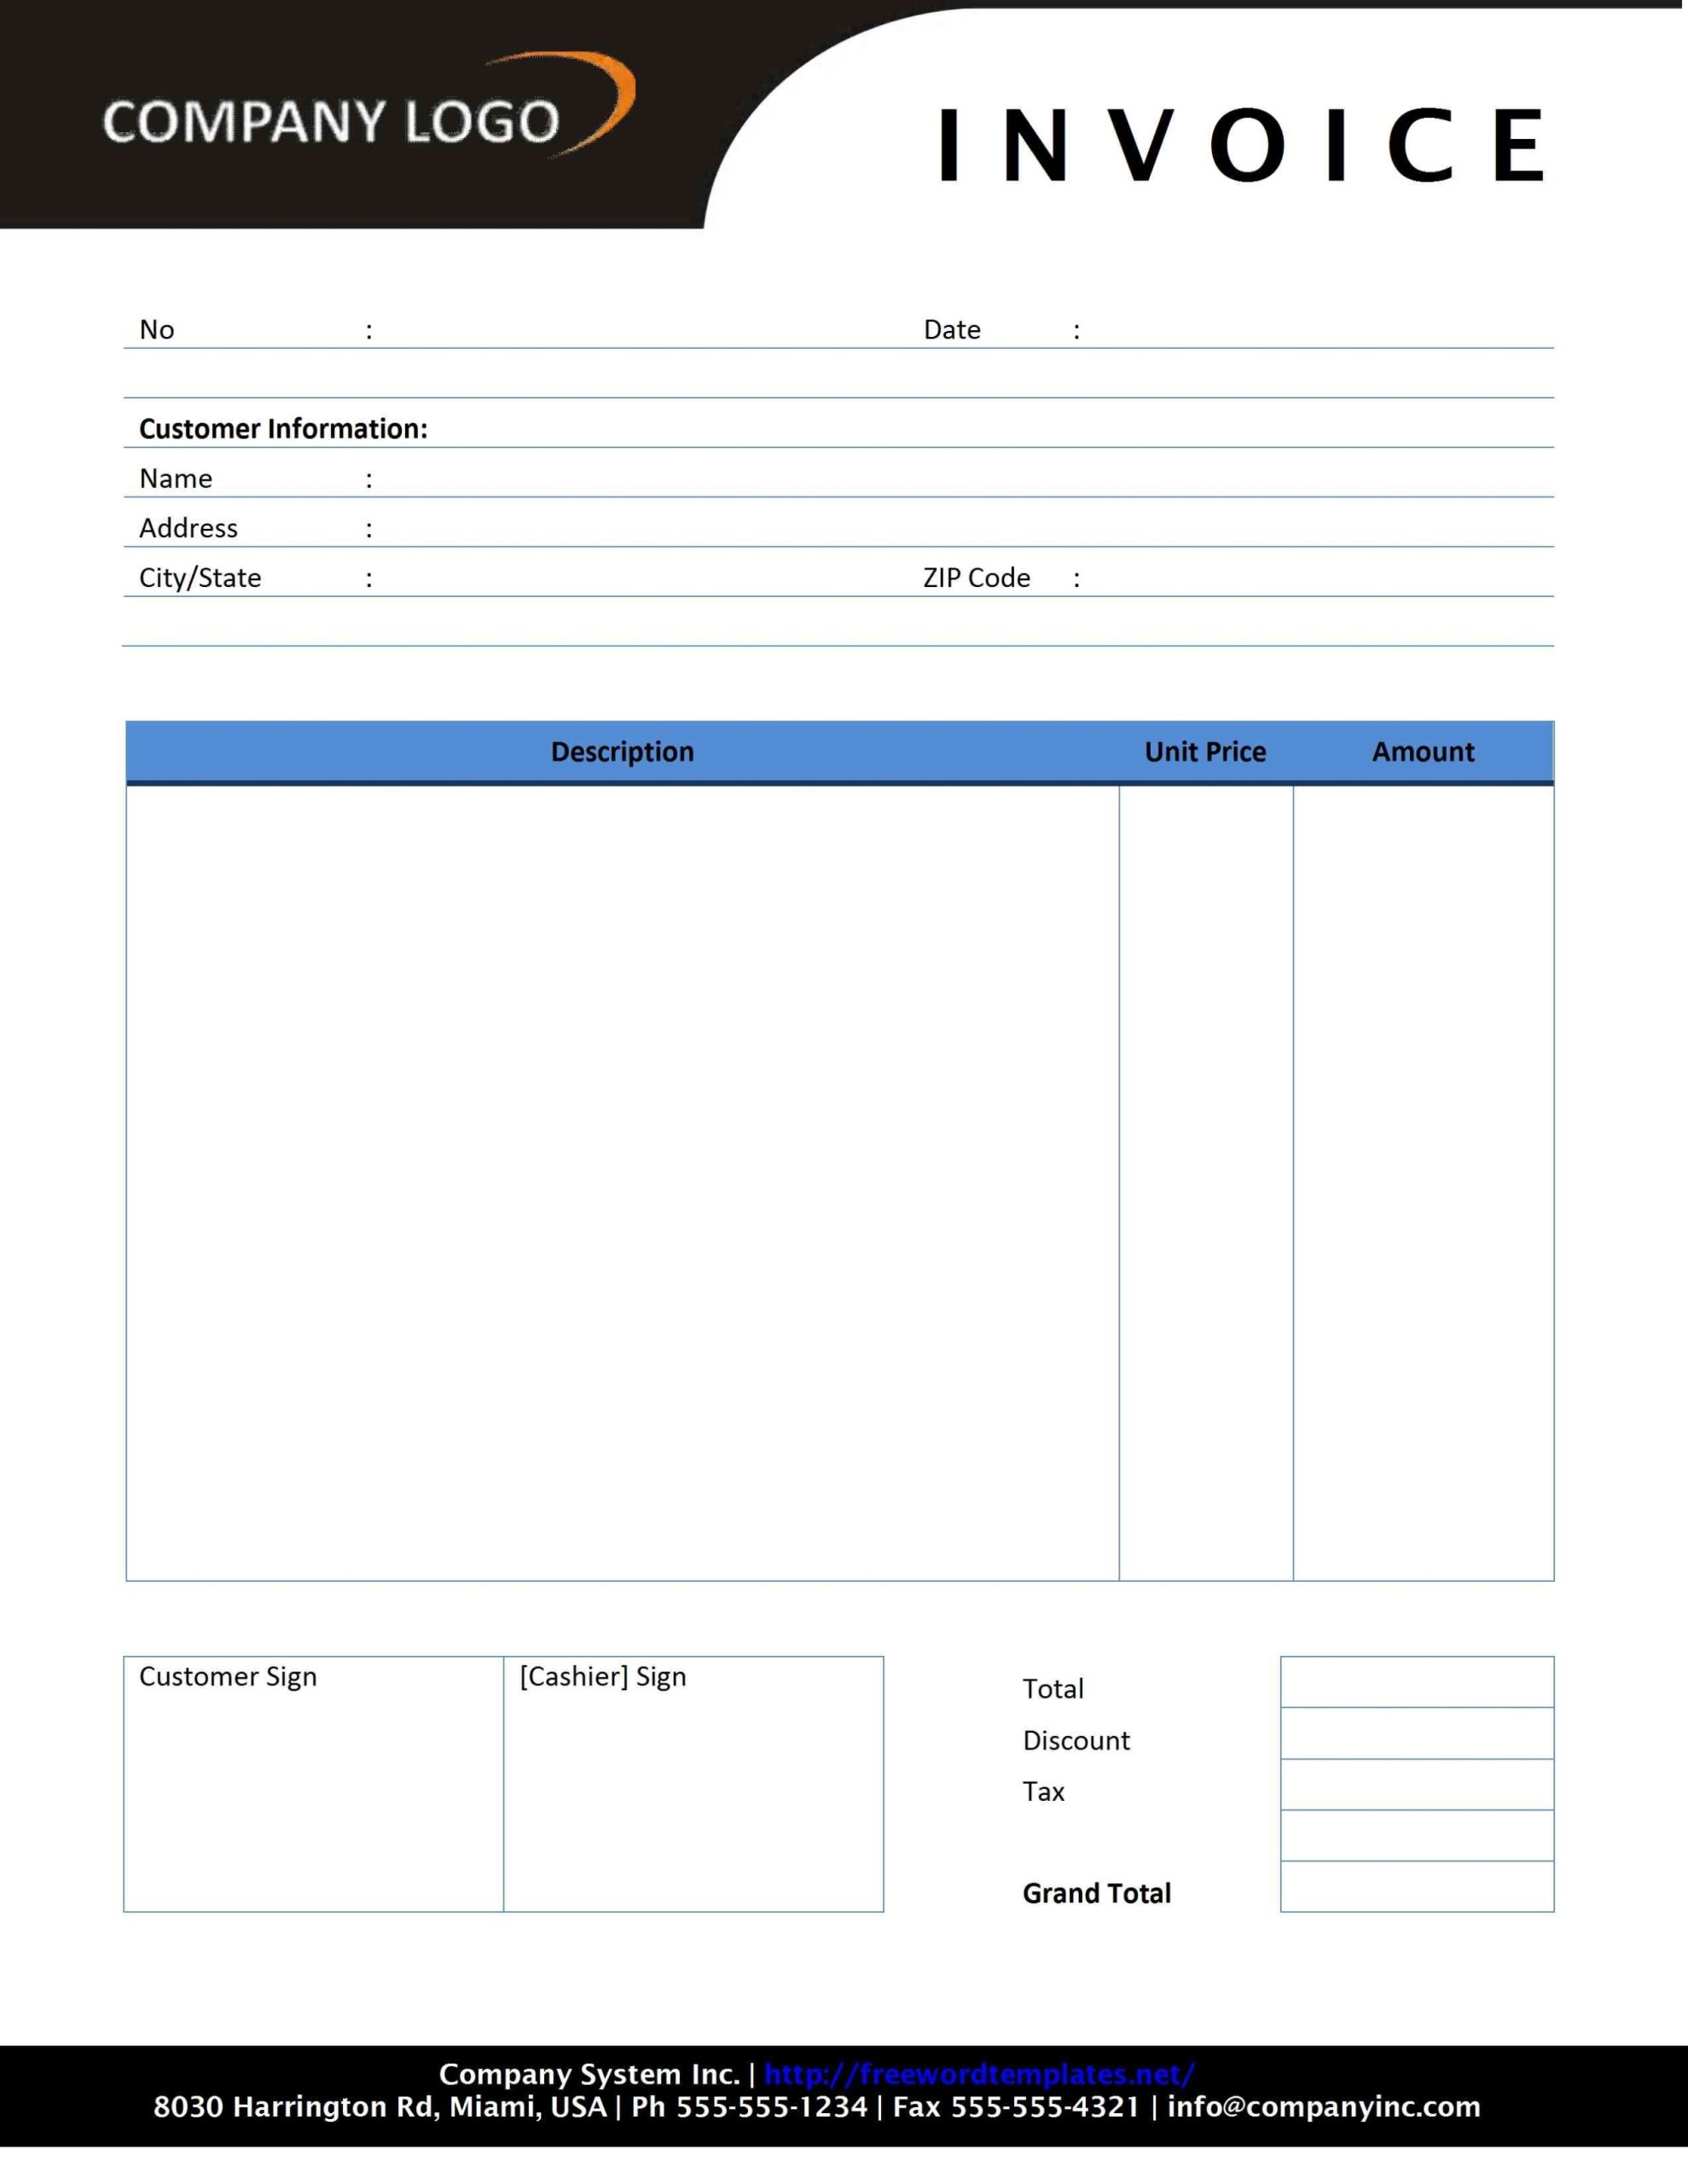 Invoice Receipt Template Word | Invoice Example For Microsoft Office Word Invoice Template